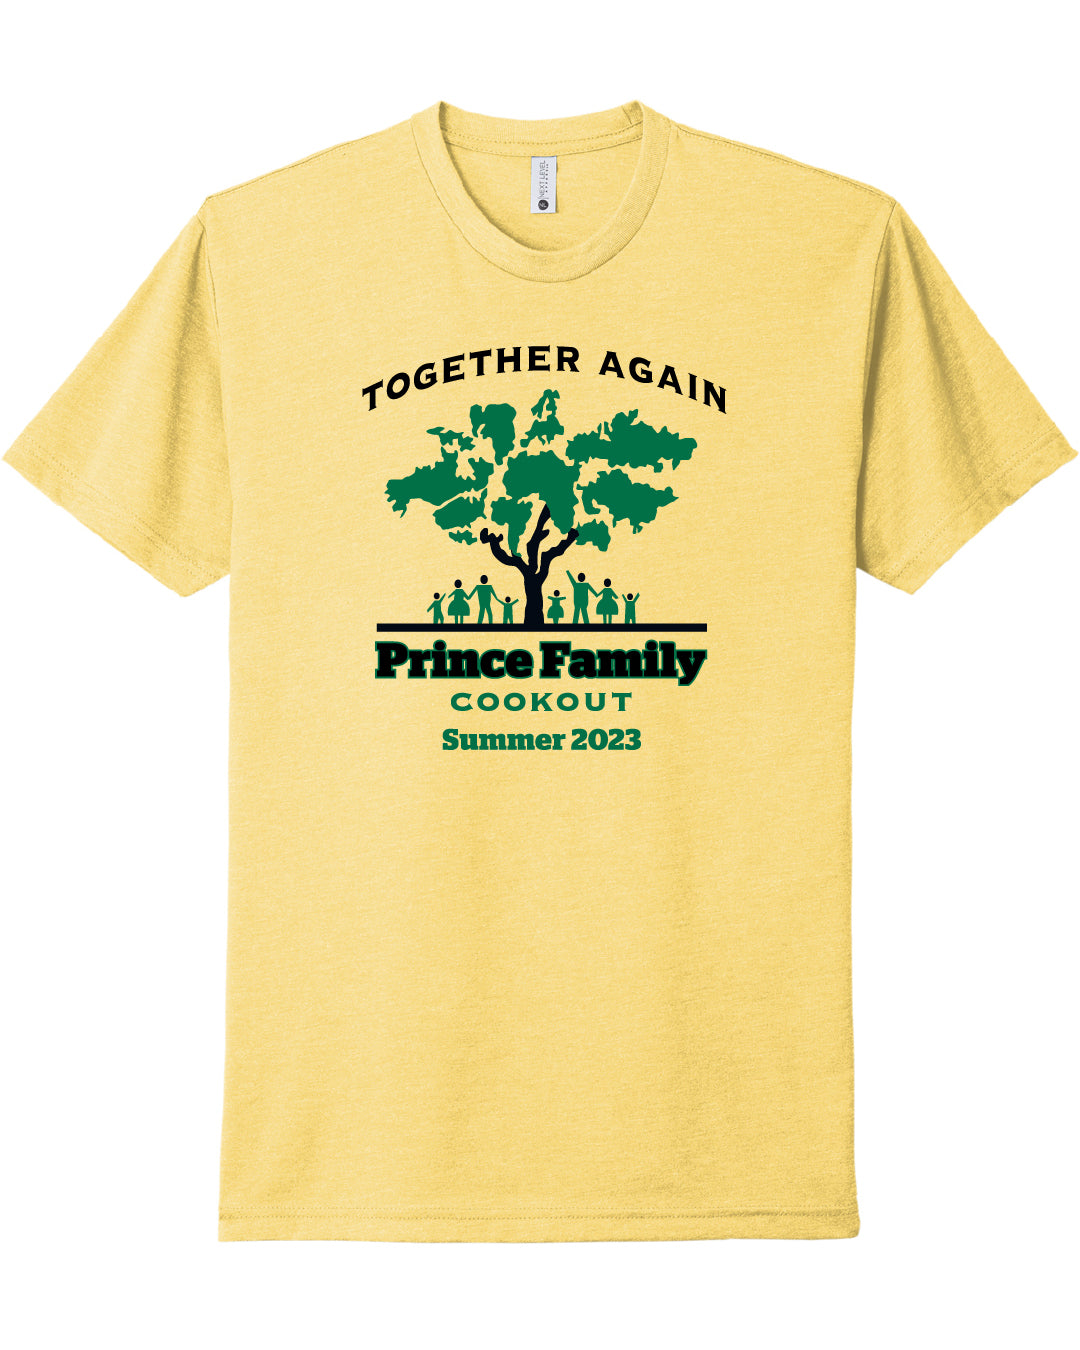 Prince Family Cookout T-Shirt